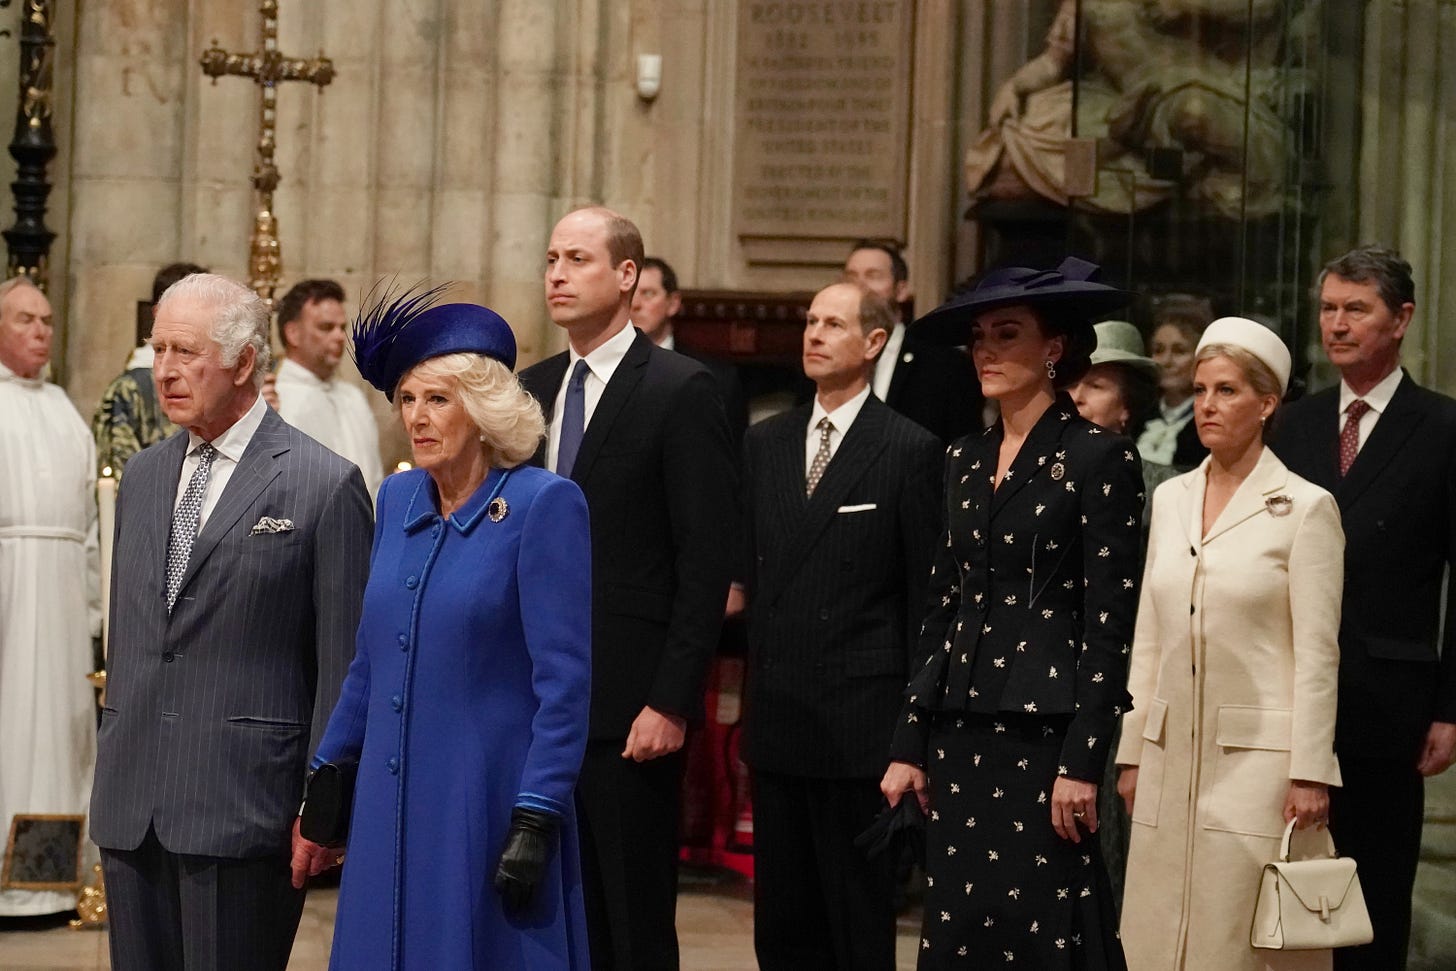 Royals arriving at the Commonwealth Day service 2023